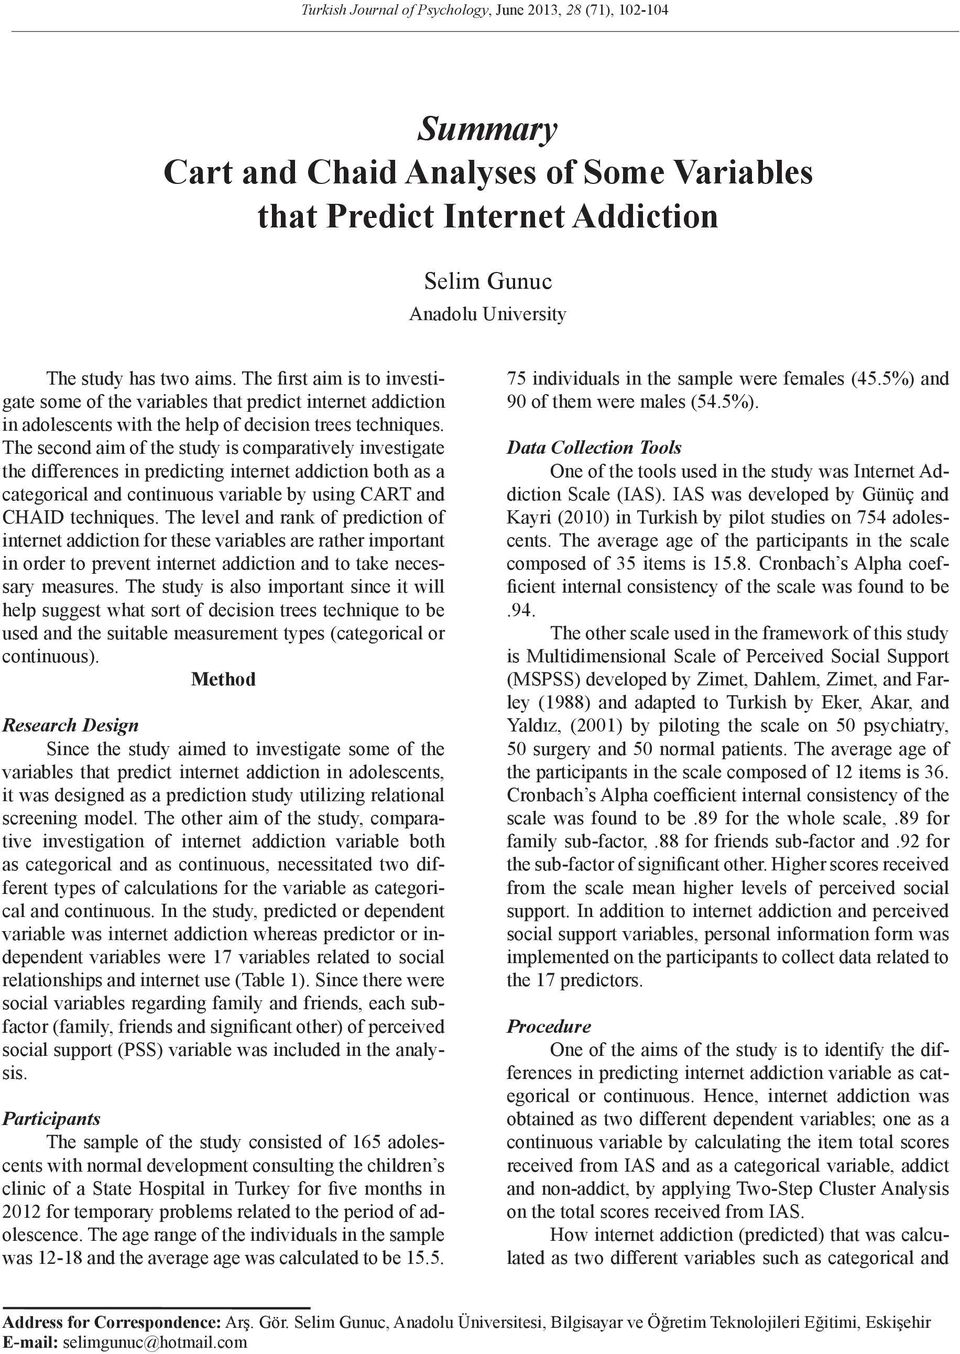 The second aim of the study is comparatively investigate the differences in predicting internet addiction both as a categorical and continuous variable by using CART and CHAID techniques.